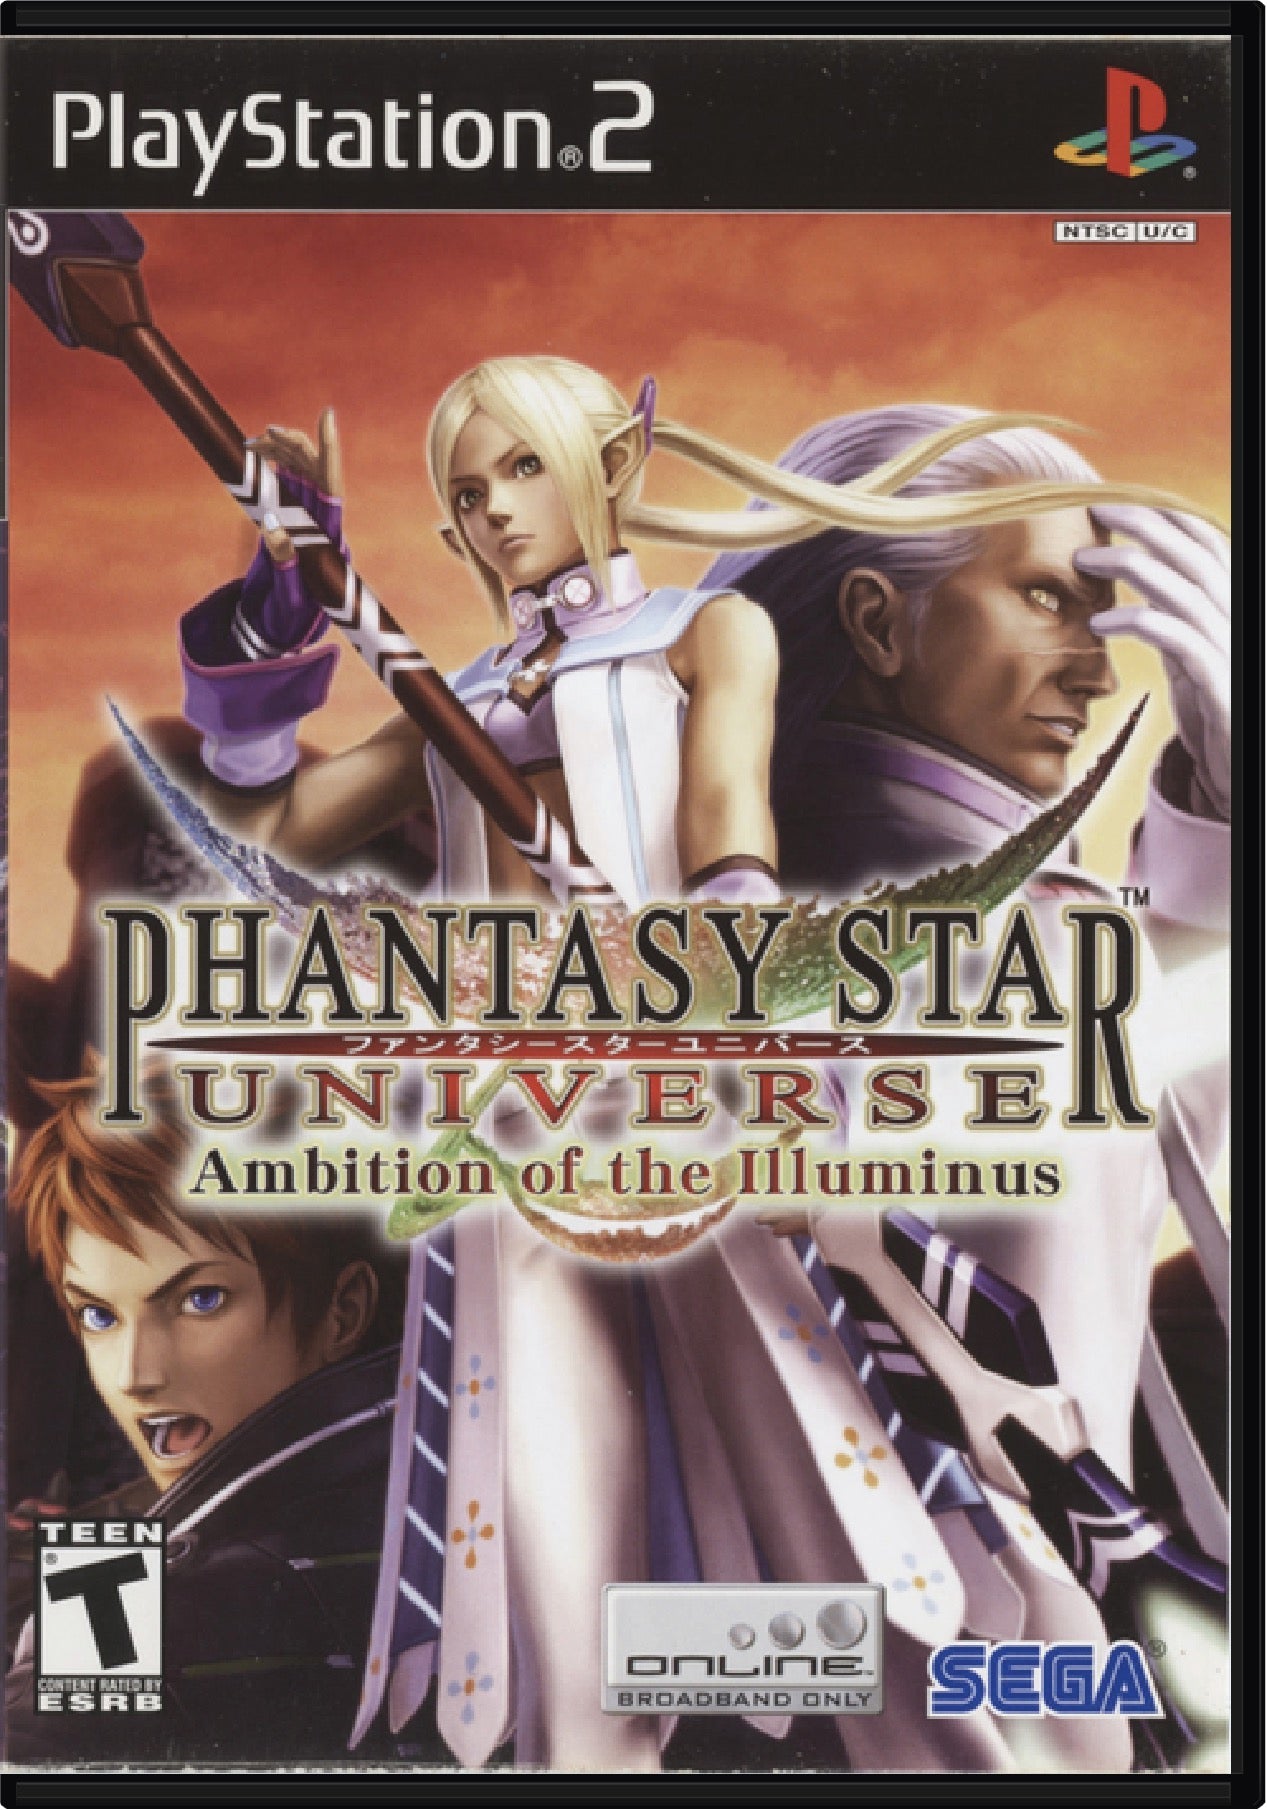 Phantasy Star Universe Ambition Of Illuminus Expansion Cover Art and Product Photo